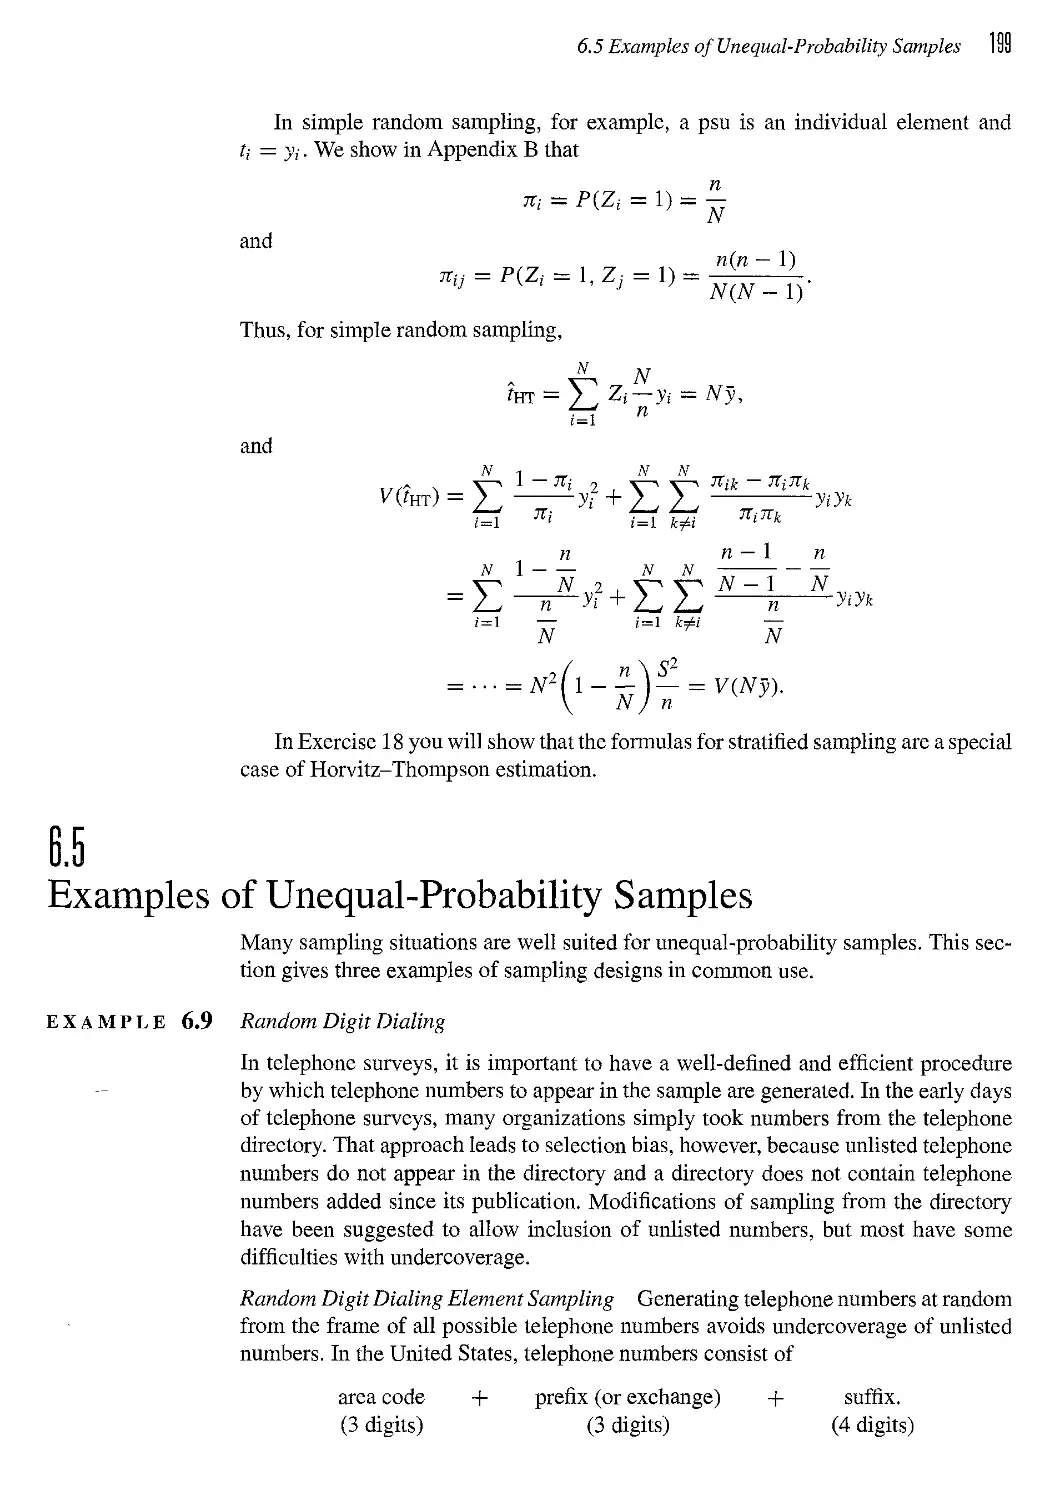 6.5 Examples of Unequal-Probability Samples